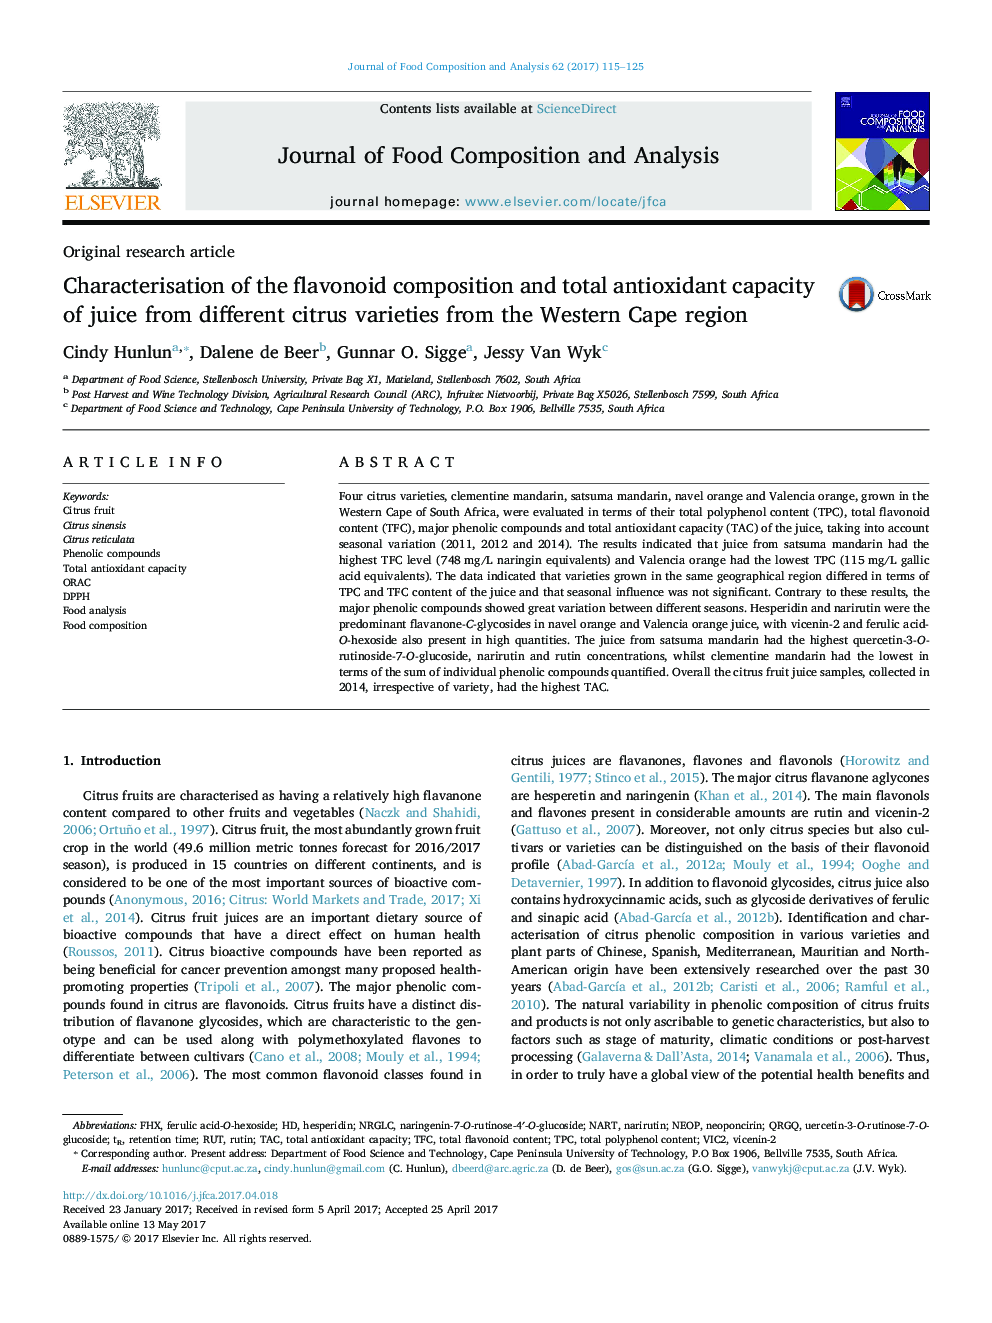 Original research articleCharacterisation of the flavonoid composition and total antioxidant capacity of juice from different citrus varieties from the Western Cape region